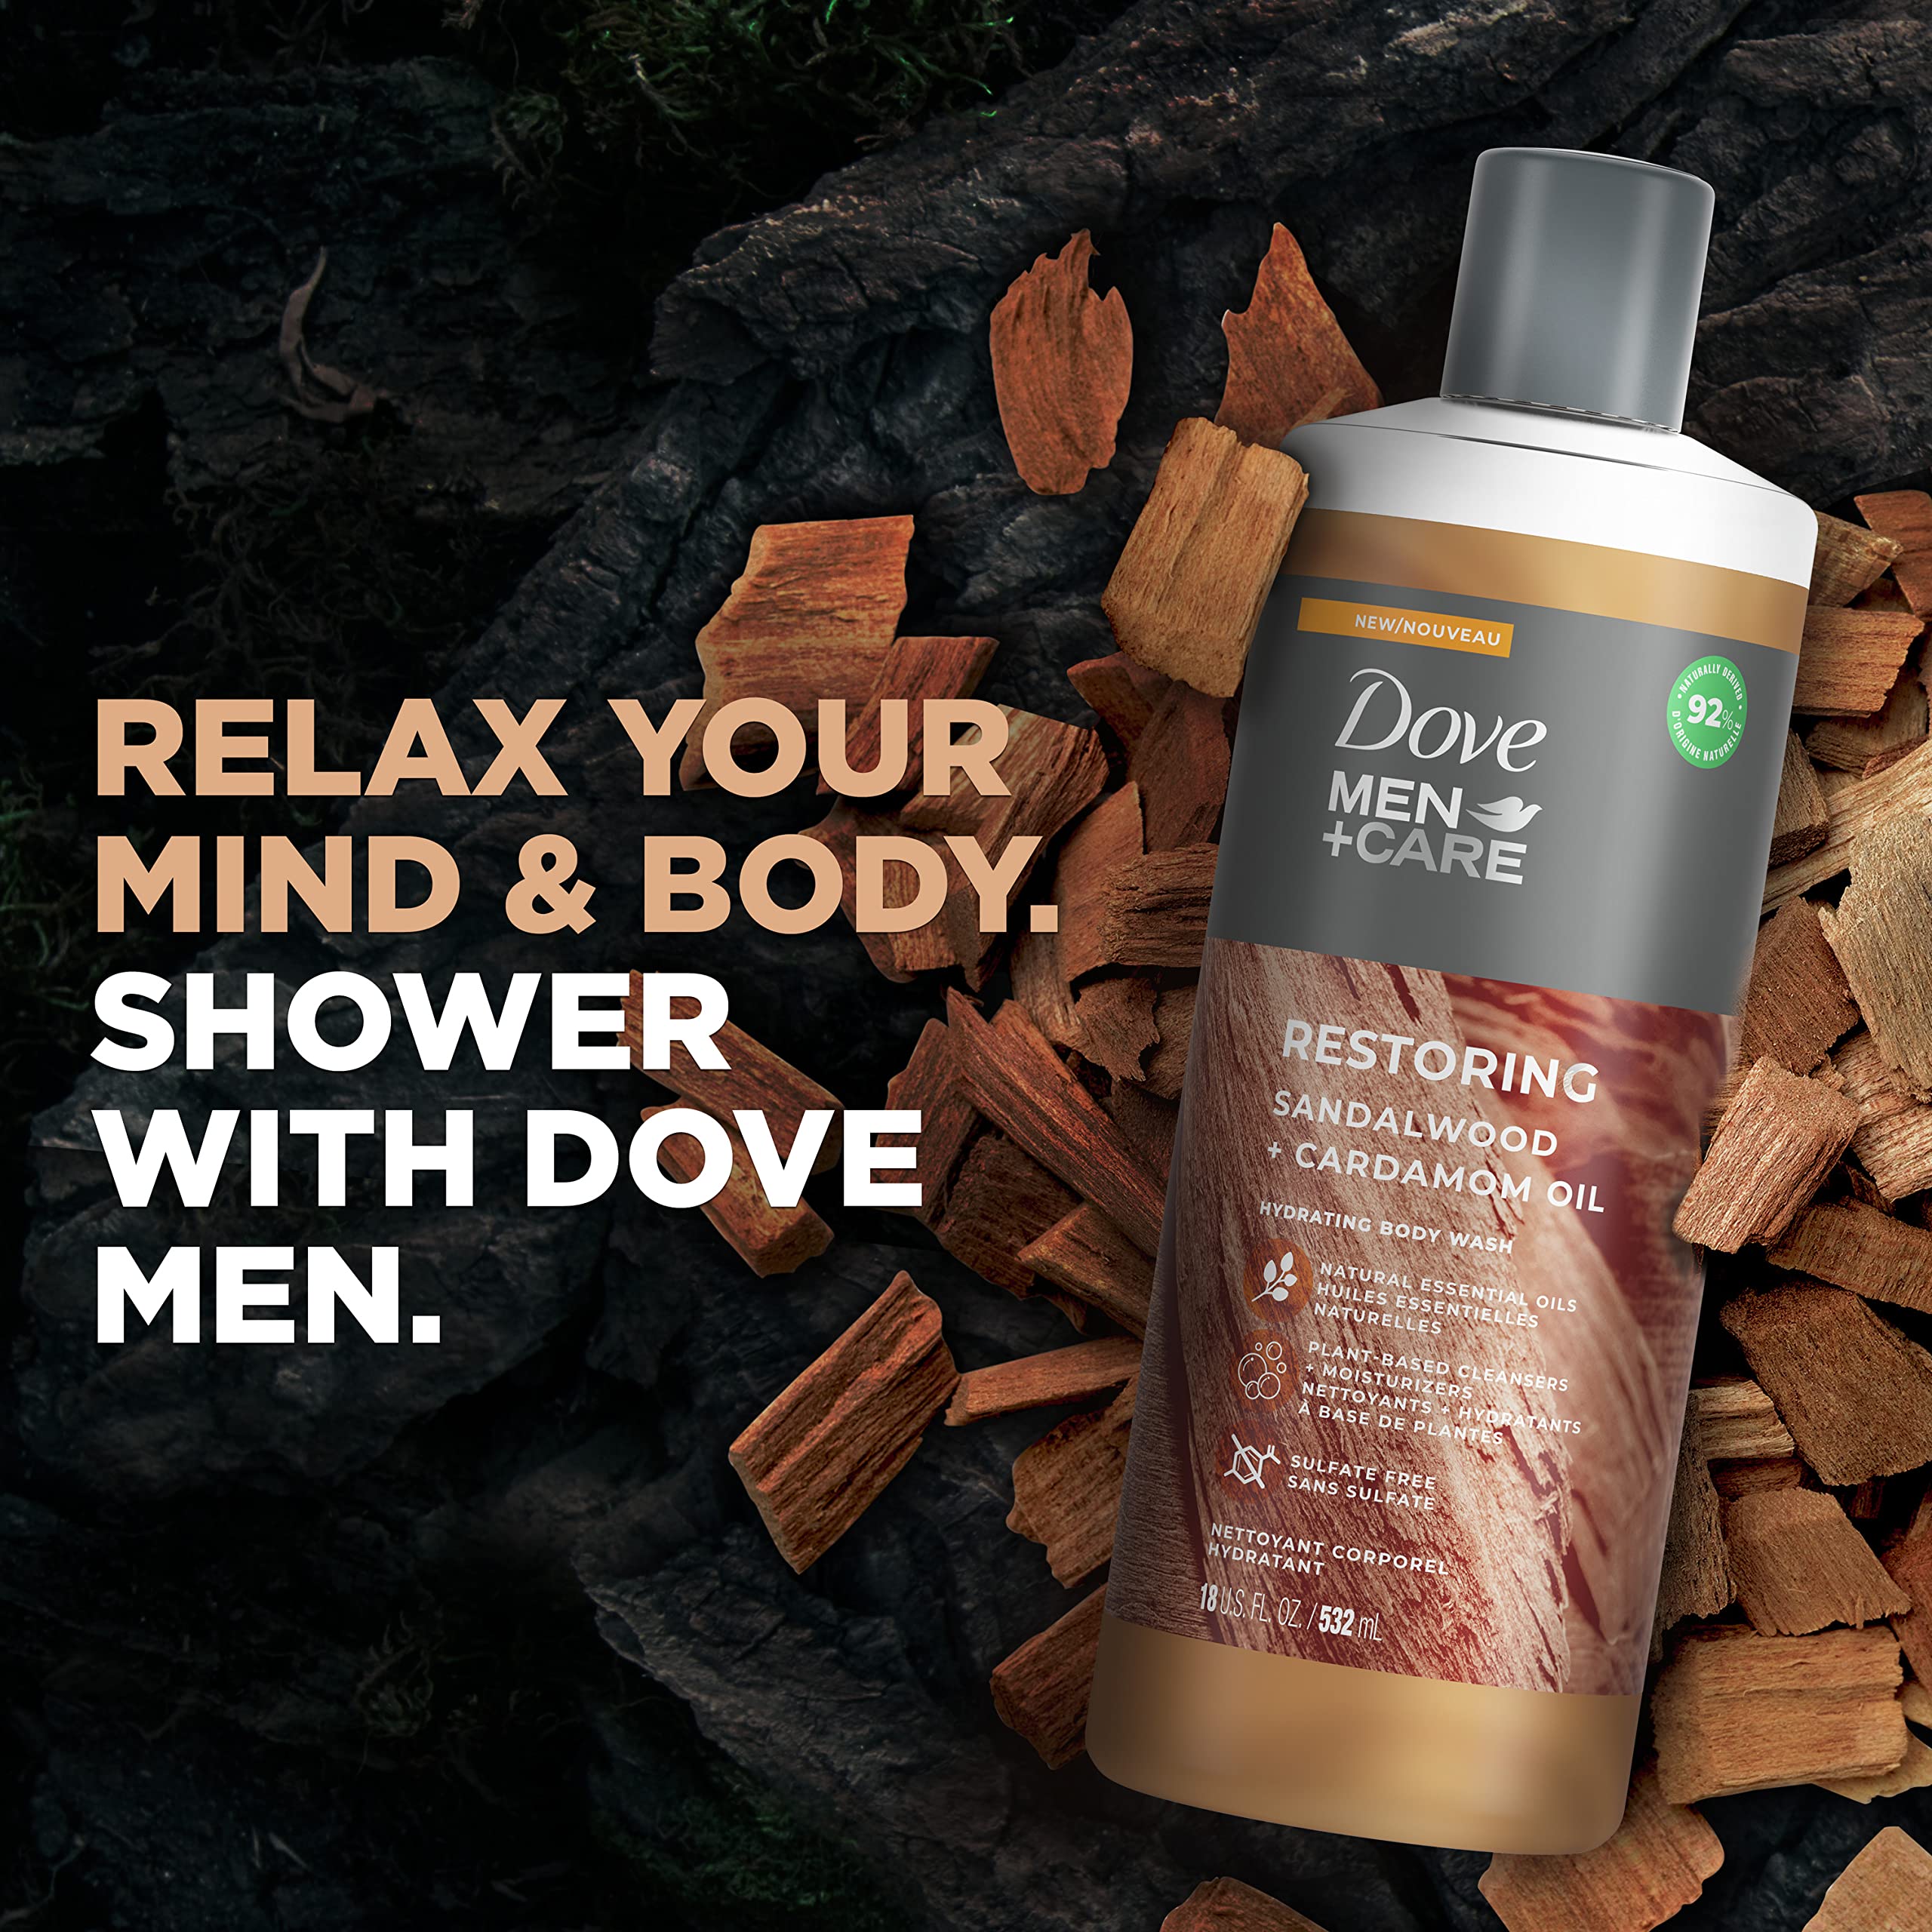 Dove Men+Care Body Wash For Fresh, Healthy-Feeling Skin Sandalwood + Cardamom Oil Cleanser That Effectively Washes Away Bacteria While Nourishing Your Skin 18 oz 4 Count